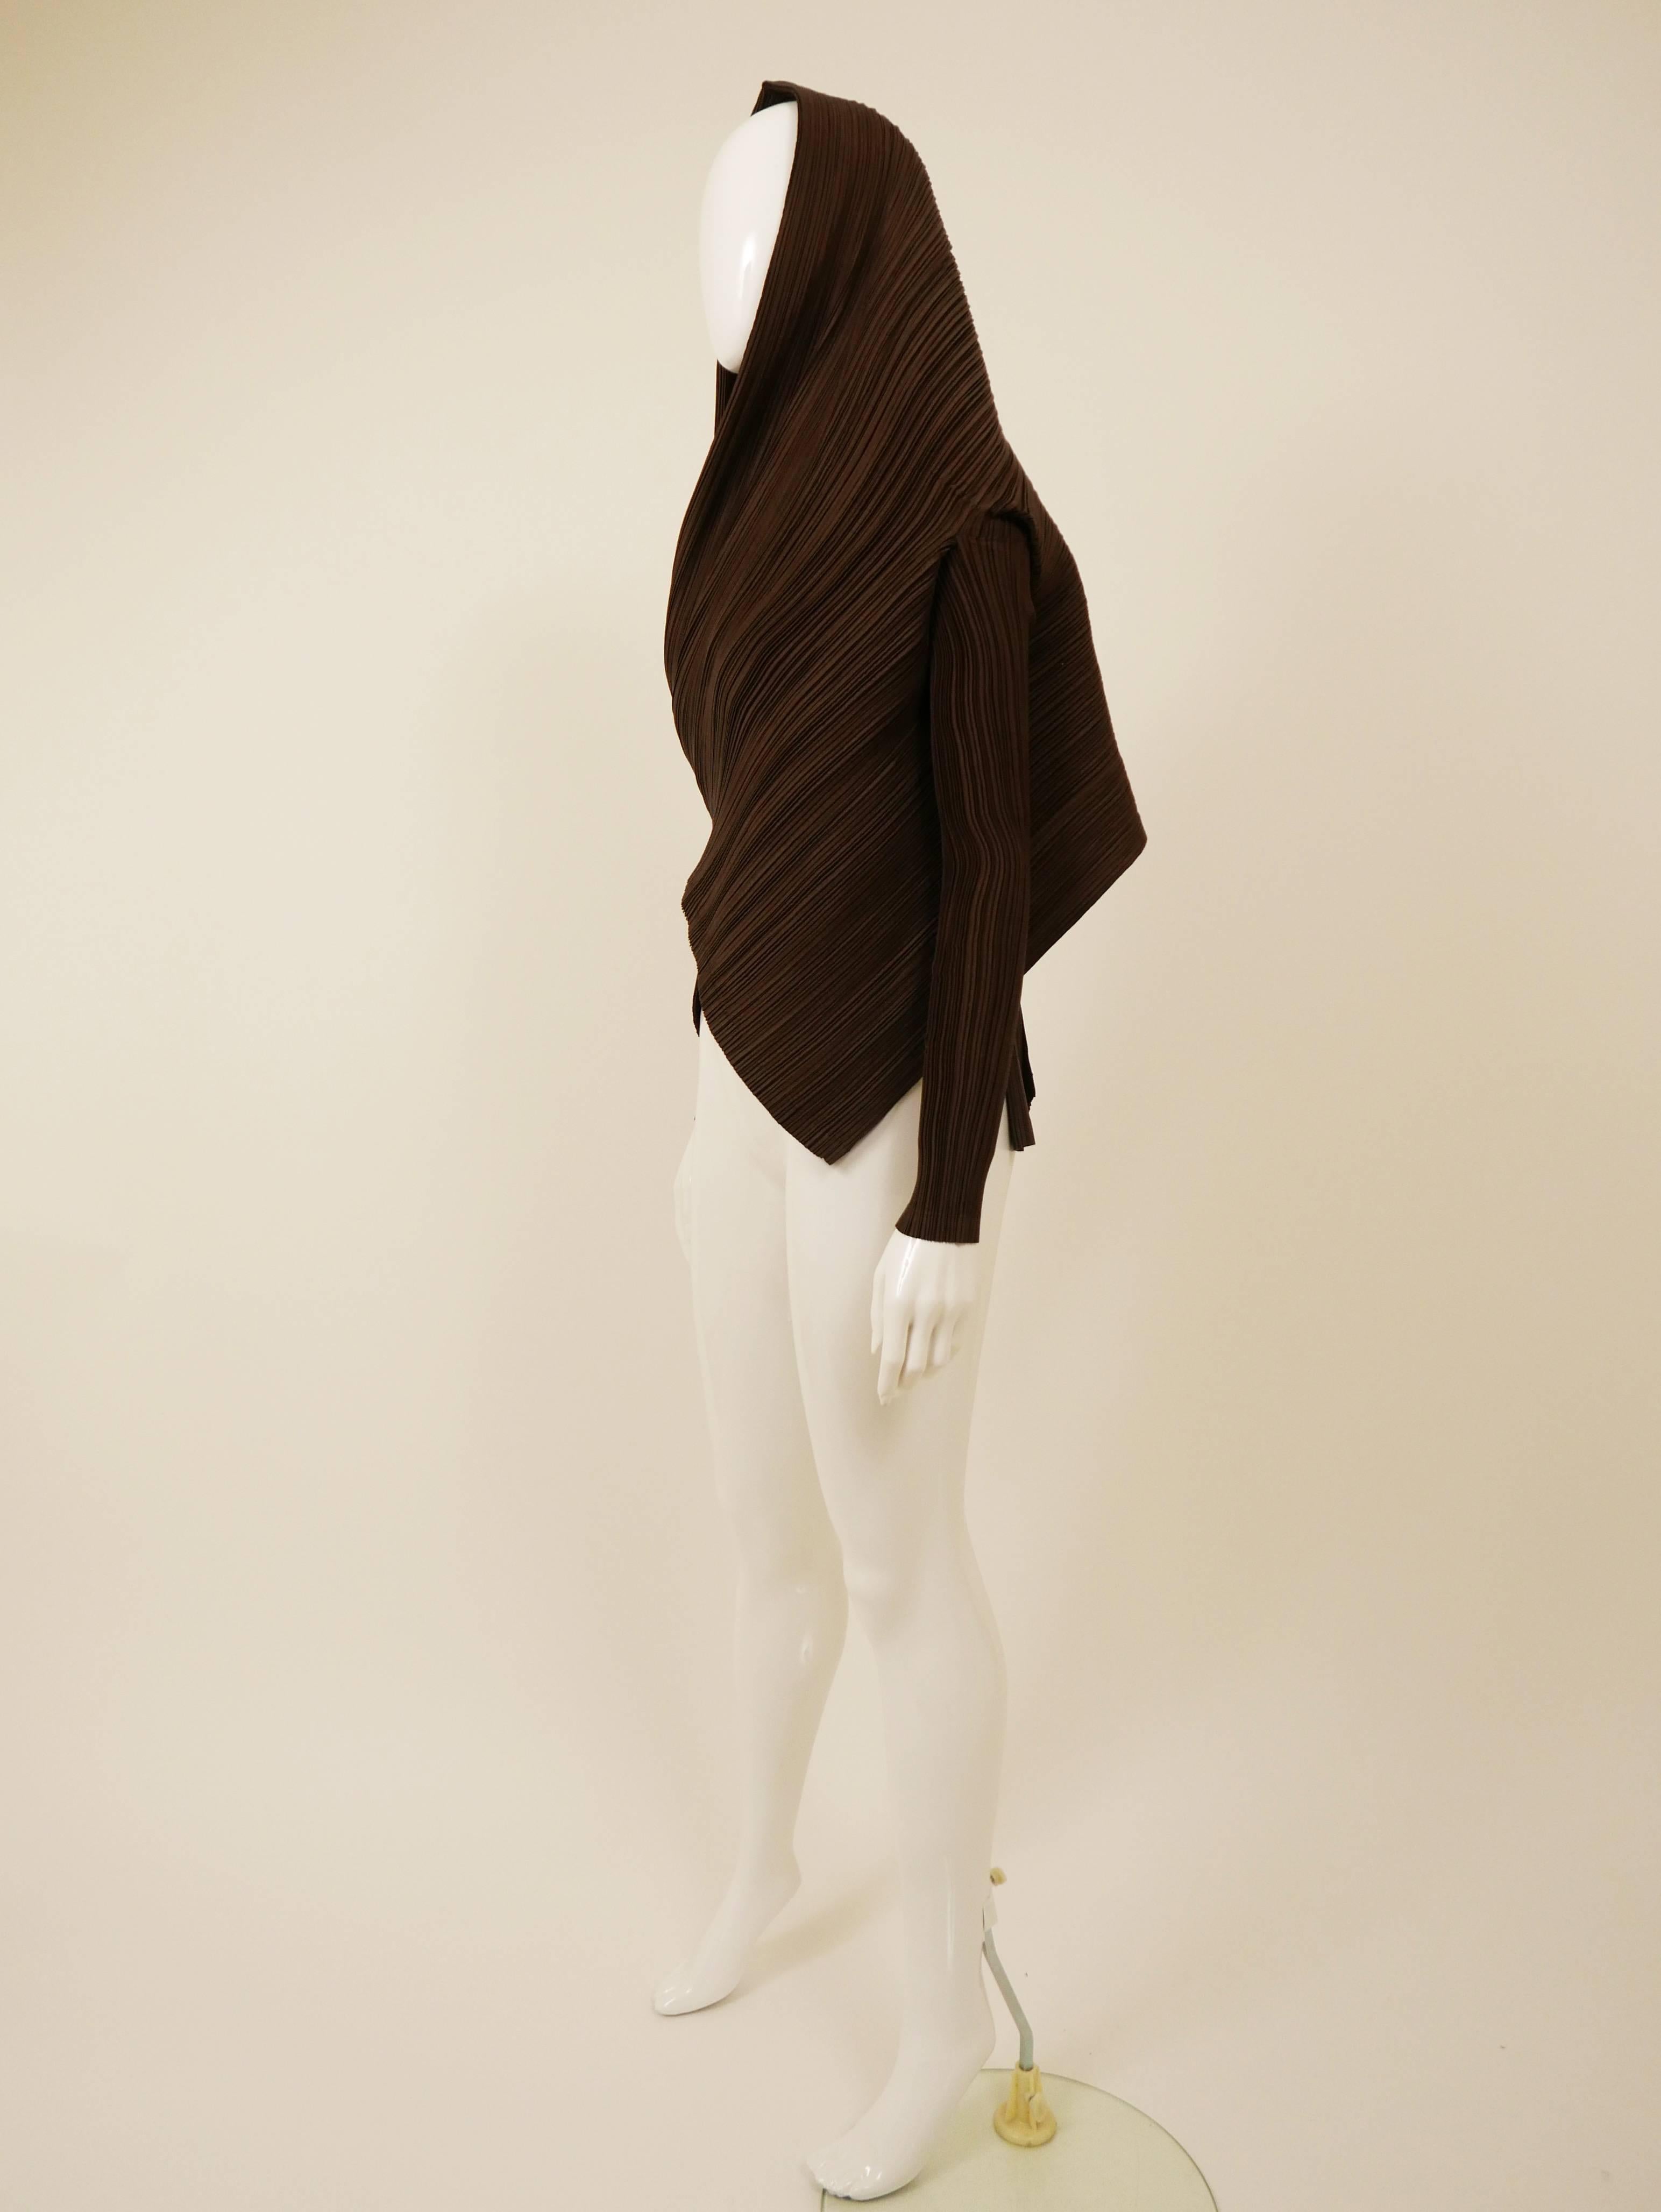 This amazing Issey Miyake blouse is a typical example of the reverse pleating technique he developed in the 1980s.

Good vintage condition

Label: Issey Miyake
Fabric: polyester
Color: brown
Code: B1603240

Measurement
Estimeted Size S/M
